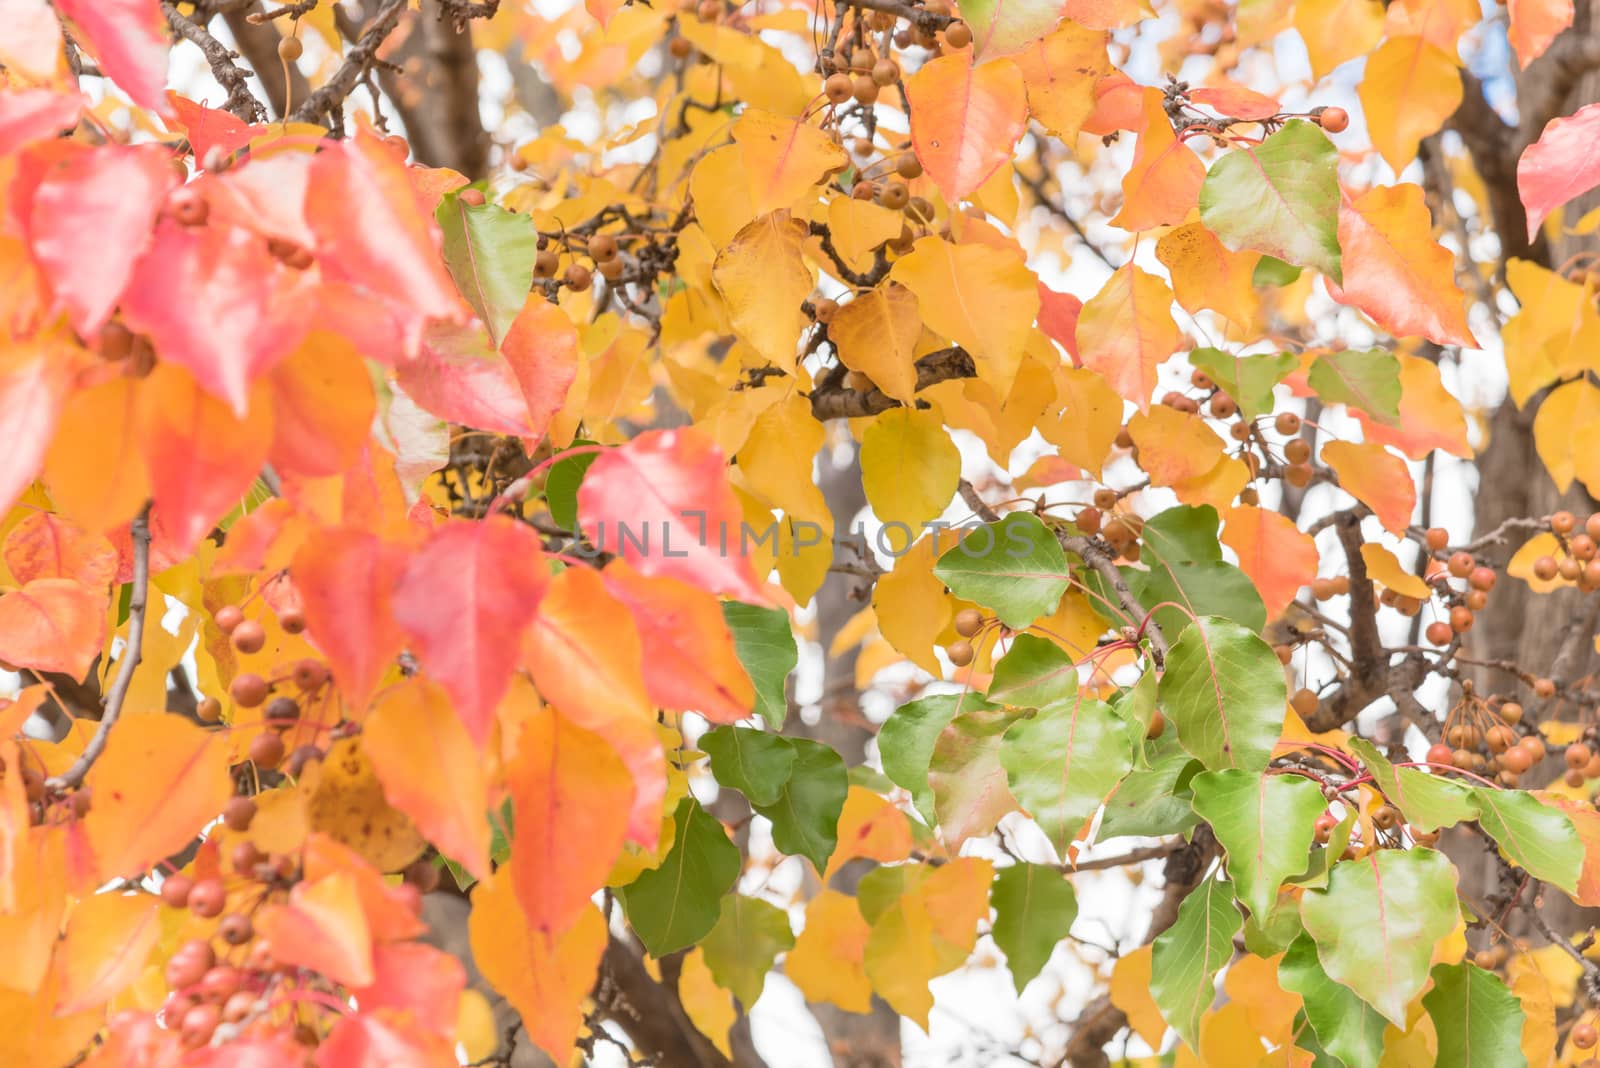 Shallow DOF green, orange, yellow, red fall leaves color of Bradford pear or Pyrus calleryana tree by trongnguyen